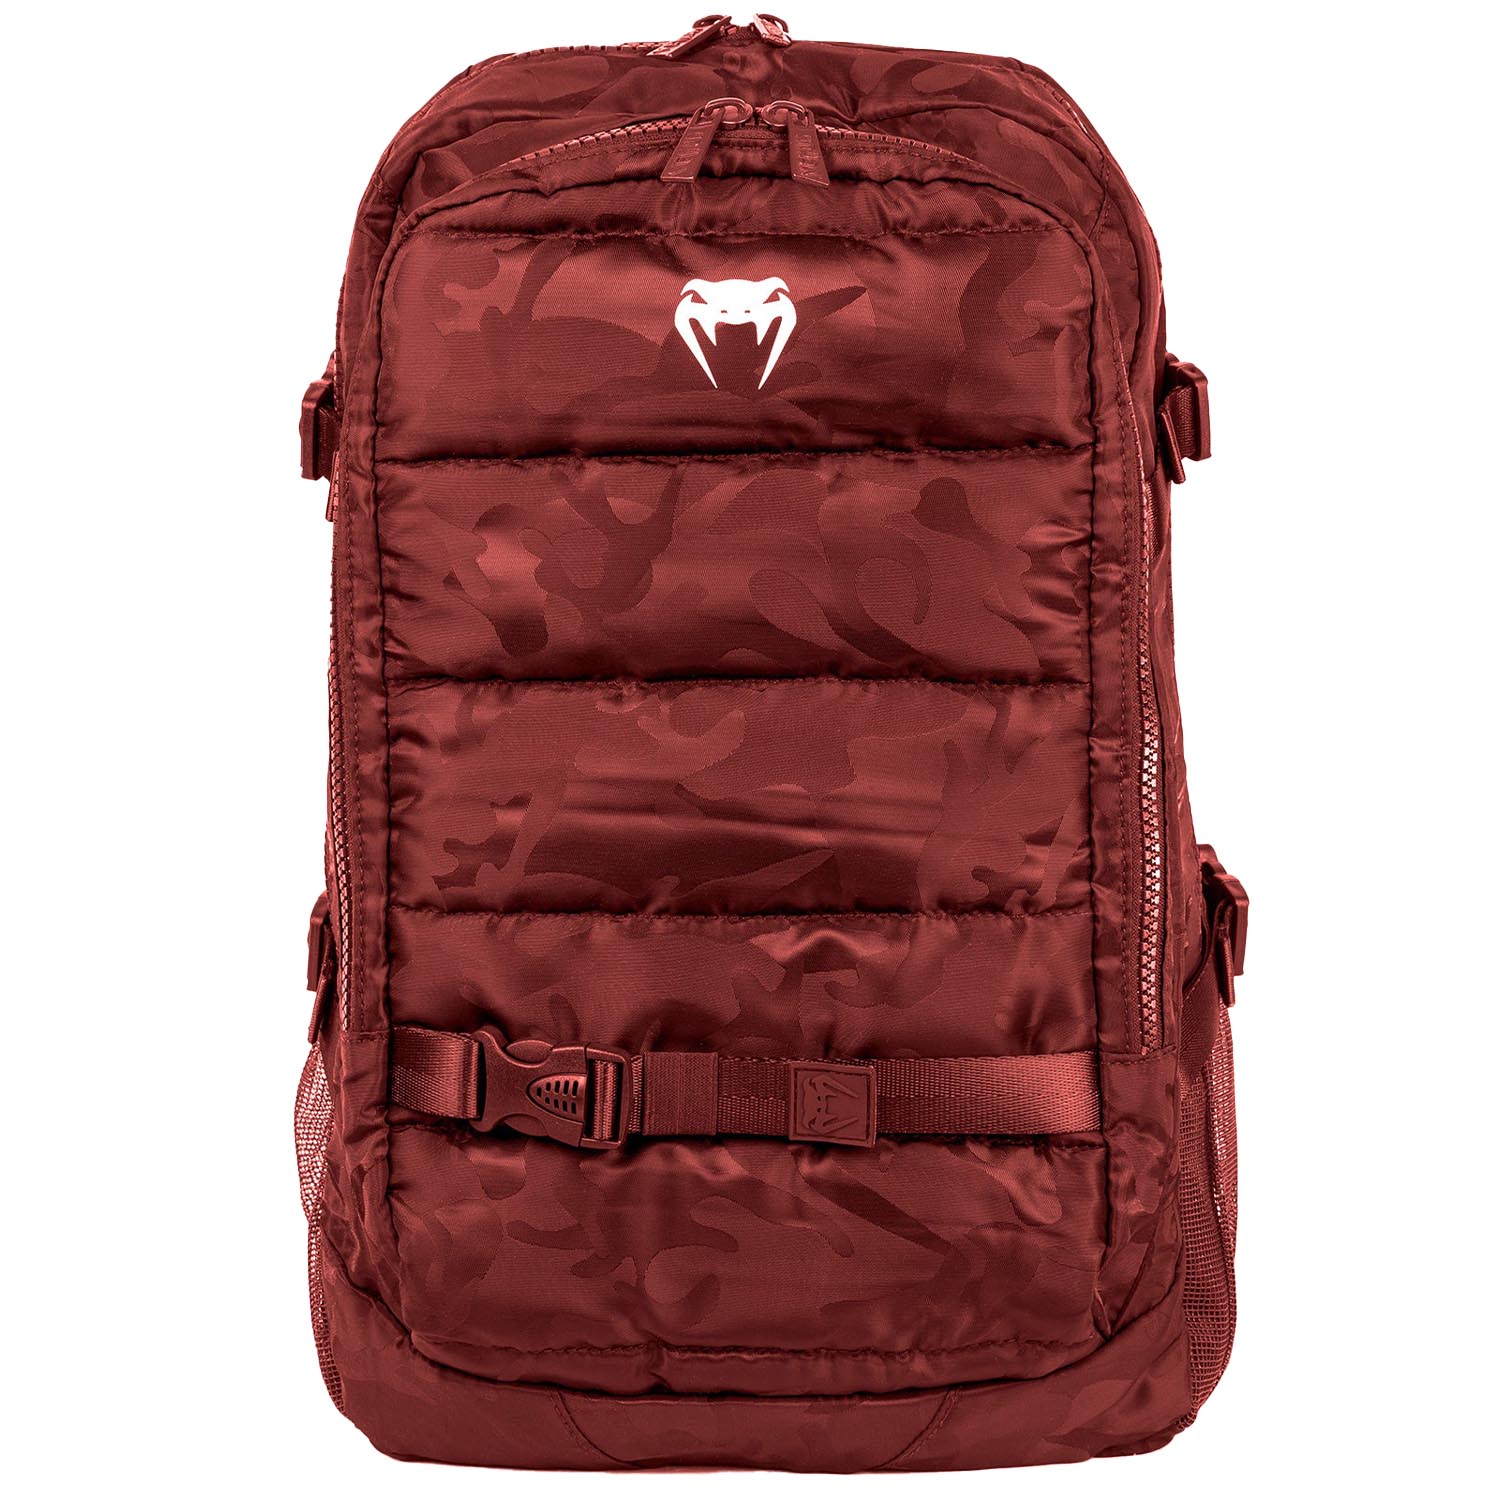 VENUM Backpack, Challenger Pro, camo-red